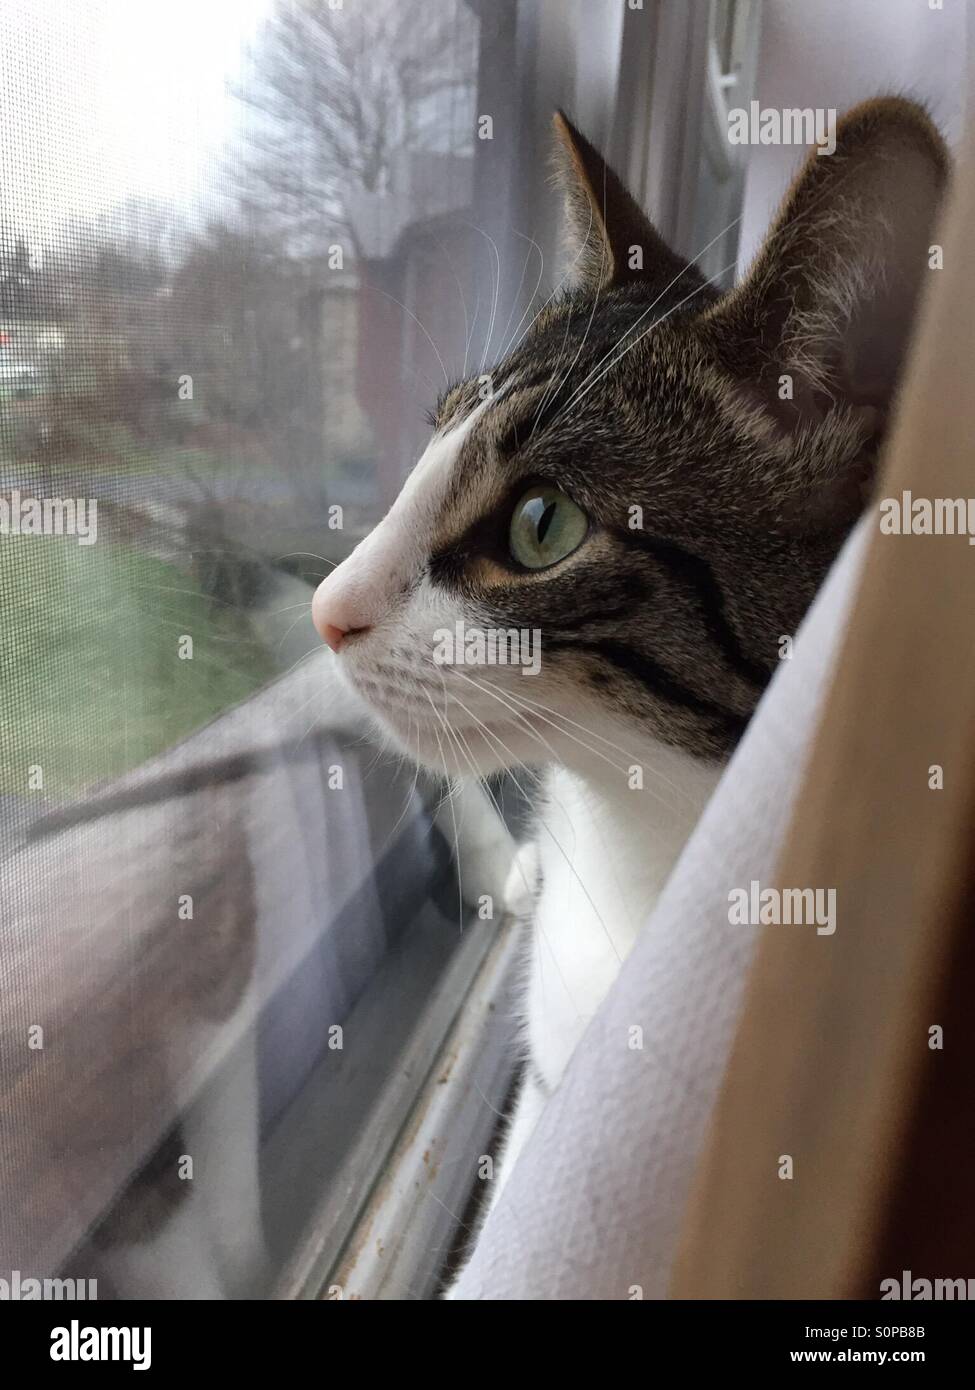 Curious kitten looking out window. Stock Photo